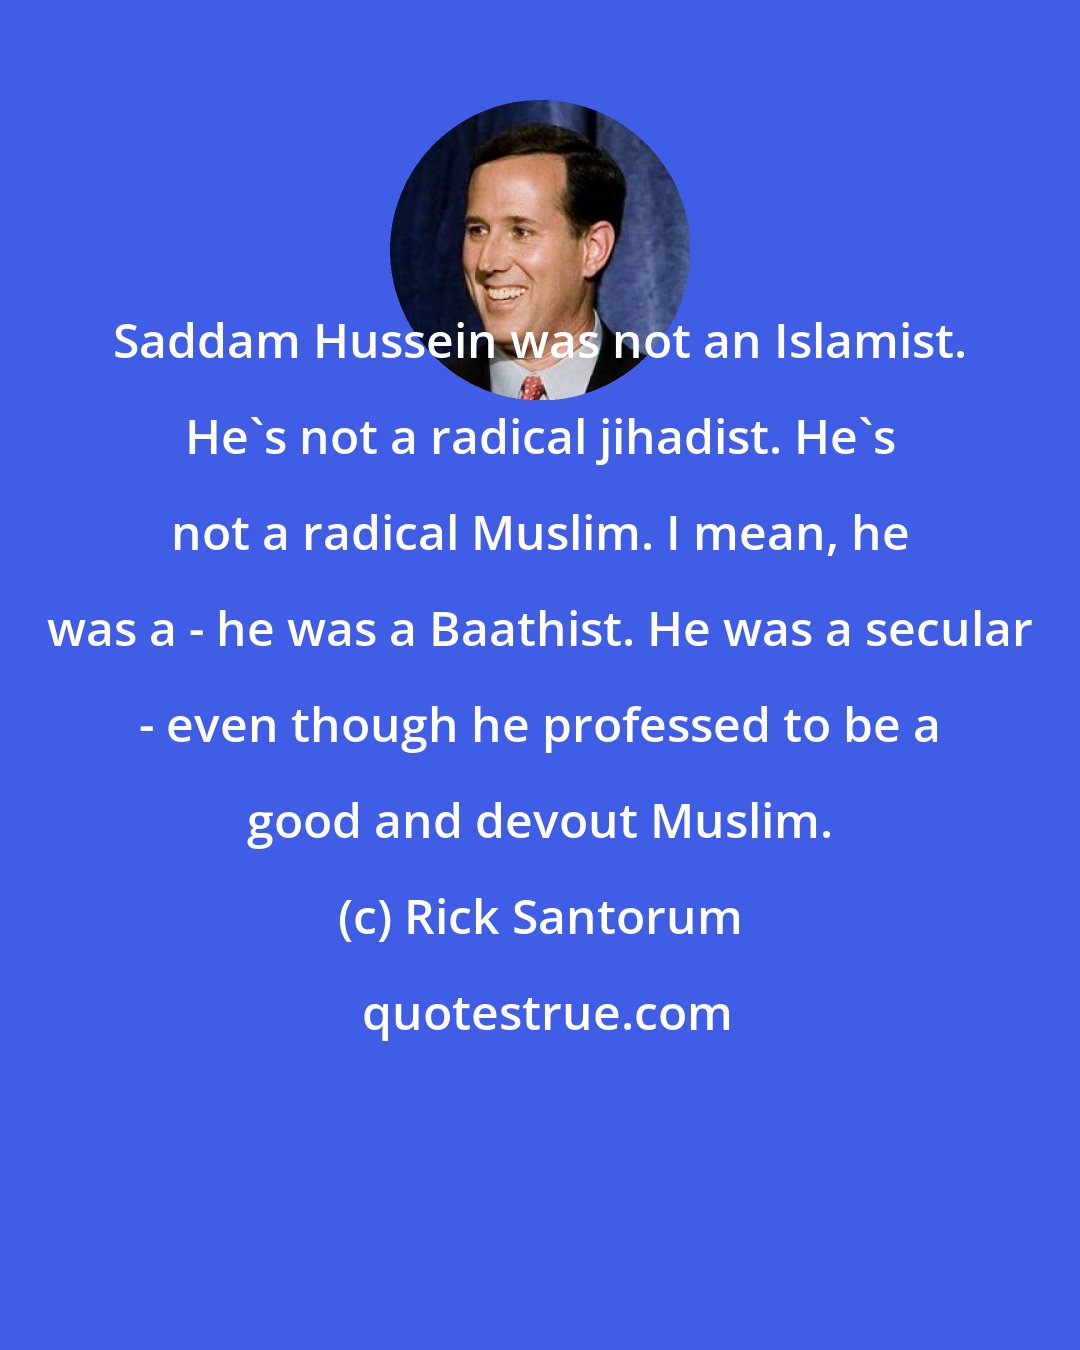 Rick Santorum: Saddam Hussein was not an Islamist. He's not a radical jihadist. He's not a radical Muslim. I mean, he was a - he was a Baathist. He was a secular - even though he professed to be a good and devout Muslim.